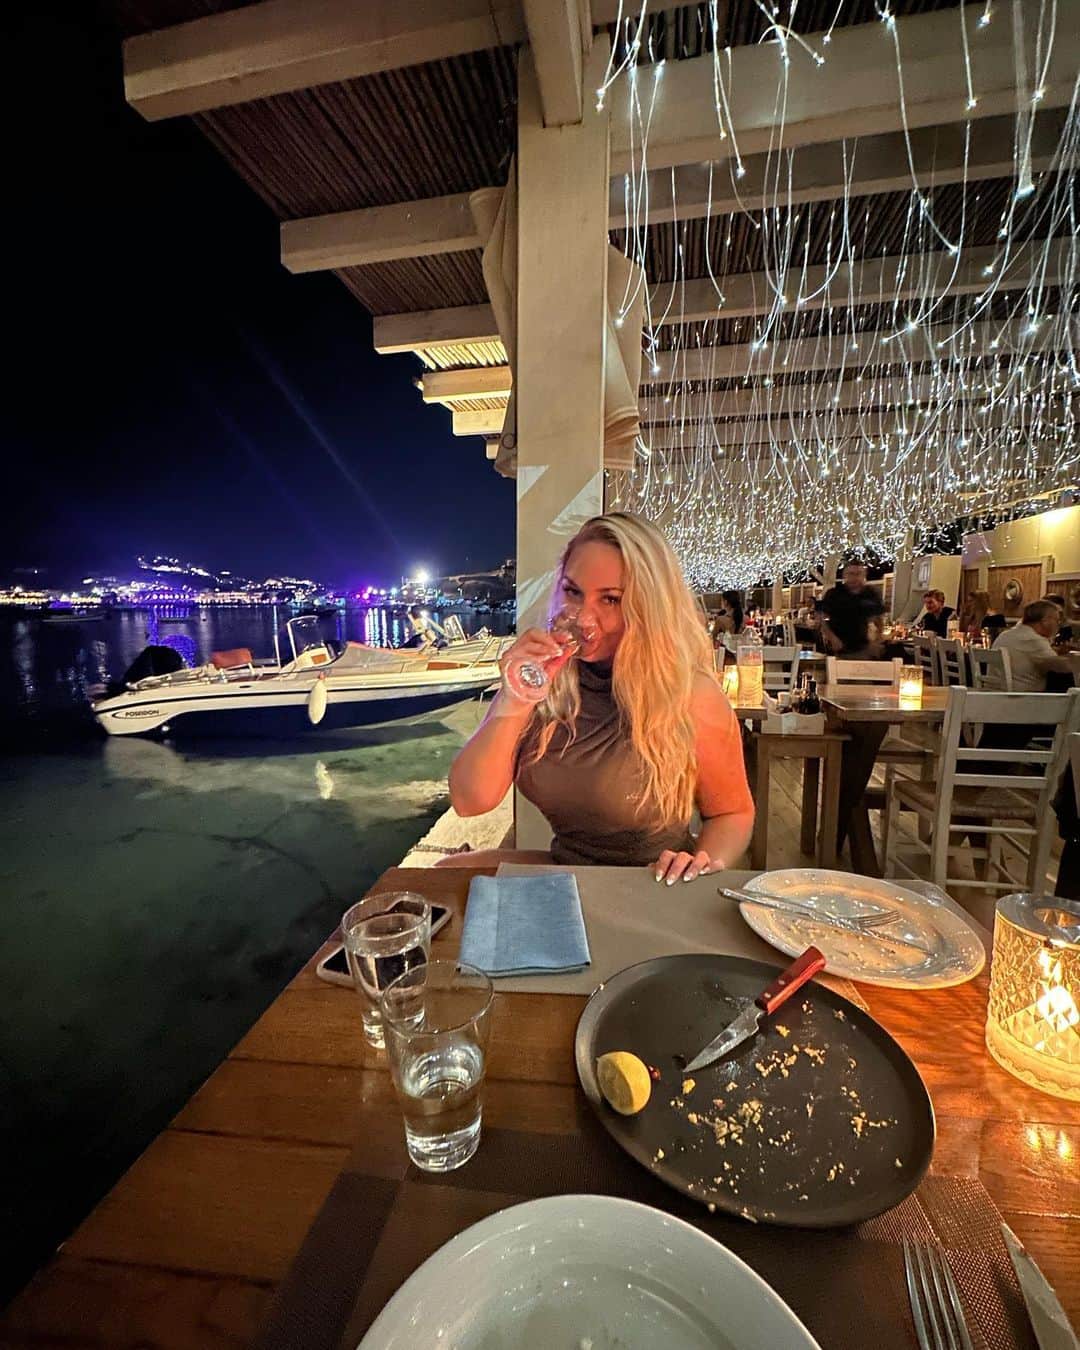 Sydney A Malerのインスタグラム：「Off the plane & straight to dinner in Mykonos. 😁 Is the informative posting (stories) a vibe or is it just excessive. It feels like IG is too cool for school for it now. Lol」